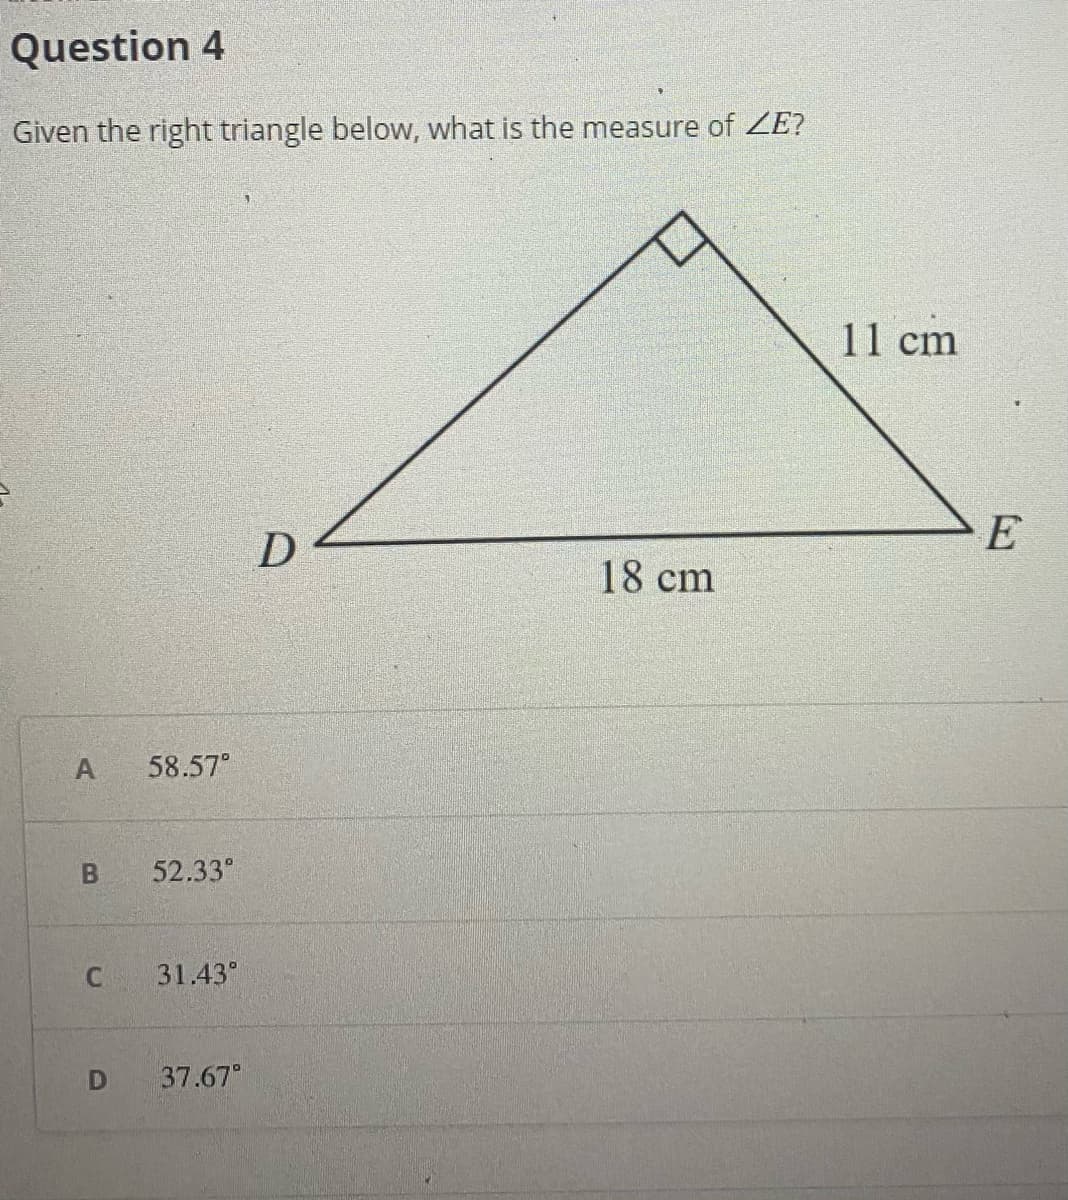 Question 4
Given the right triangle below, what is the measure of ZE?
11 cm
E
D
18 cm
58.57°
52.33°
31.43°
37.67
